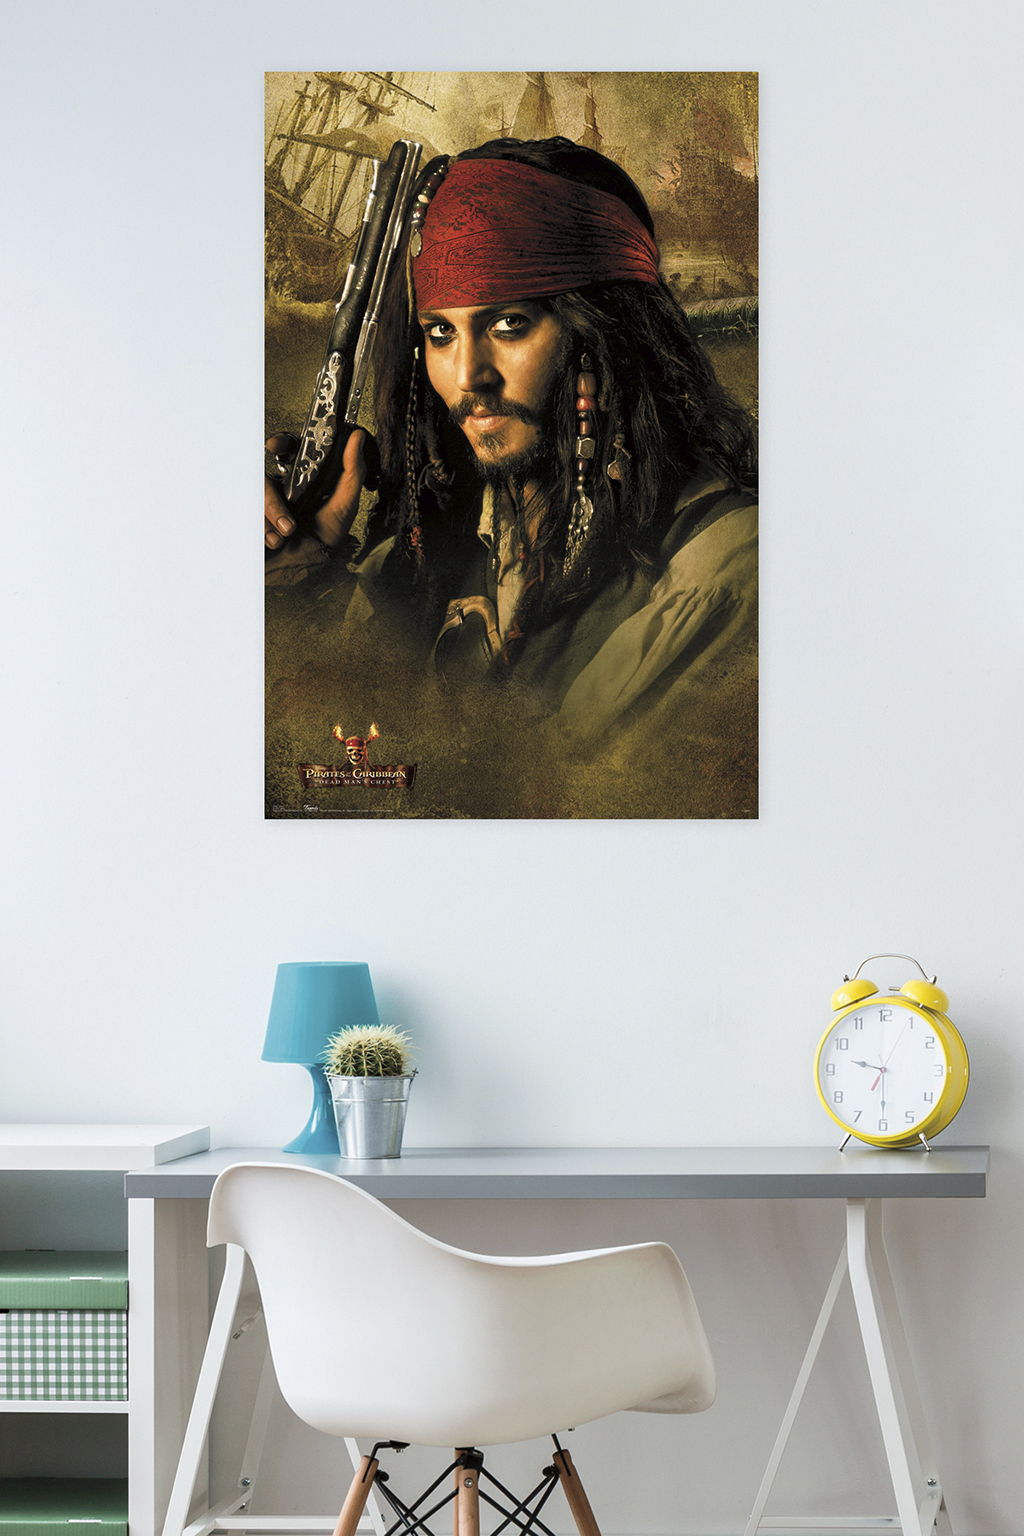 Disney Pirates of the Caribbean: Dead Man's Chest - Johnny Depp Wall Poster, 22.375" x 34" - image 2 of 2